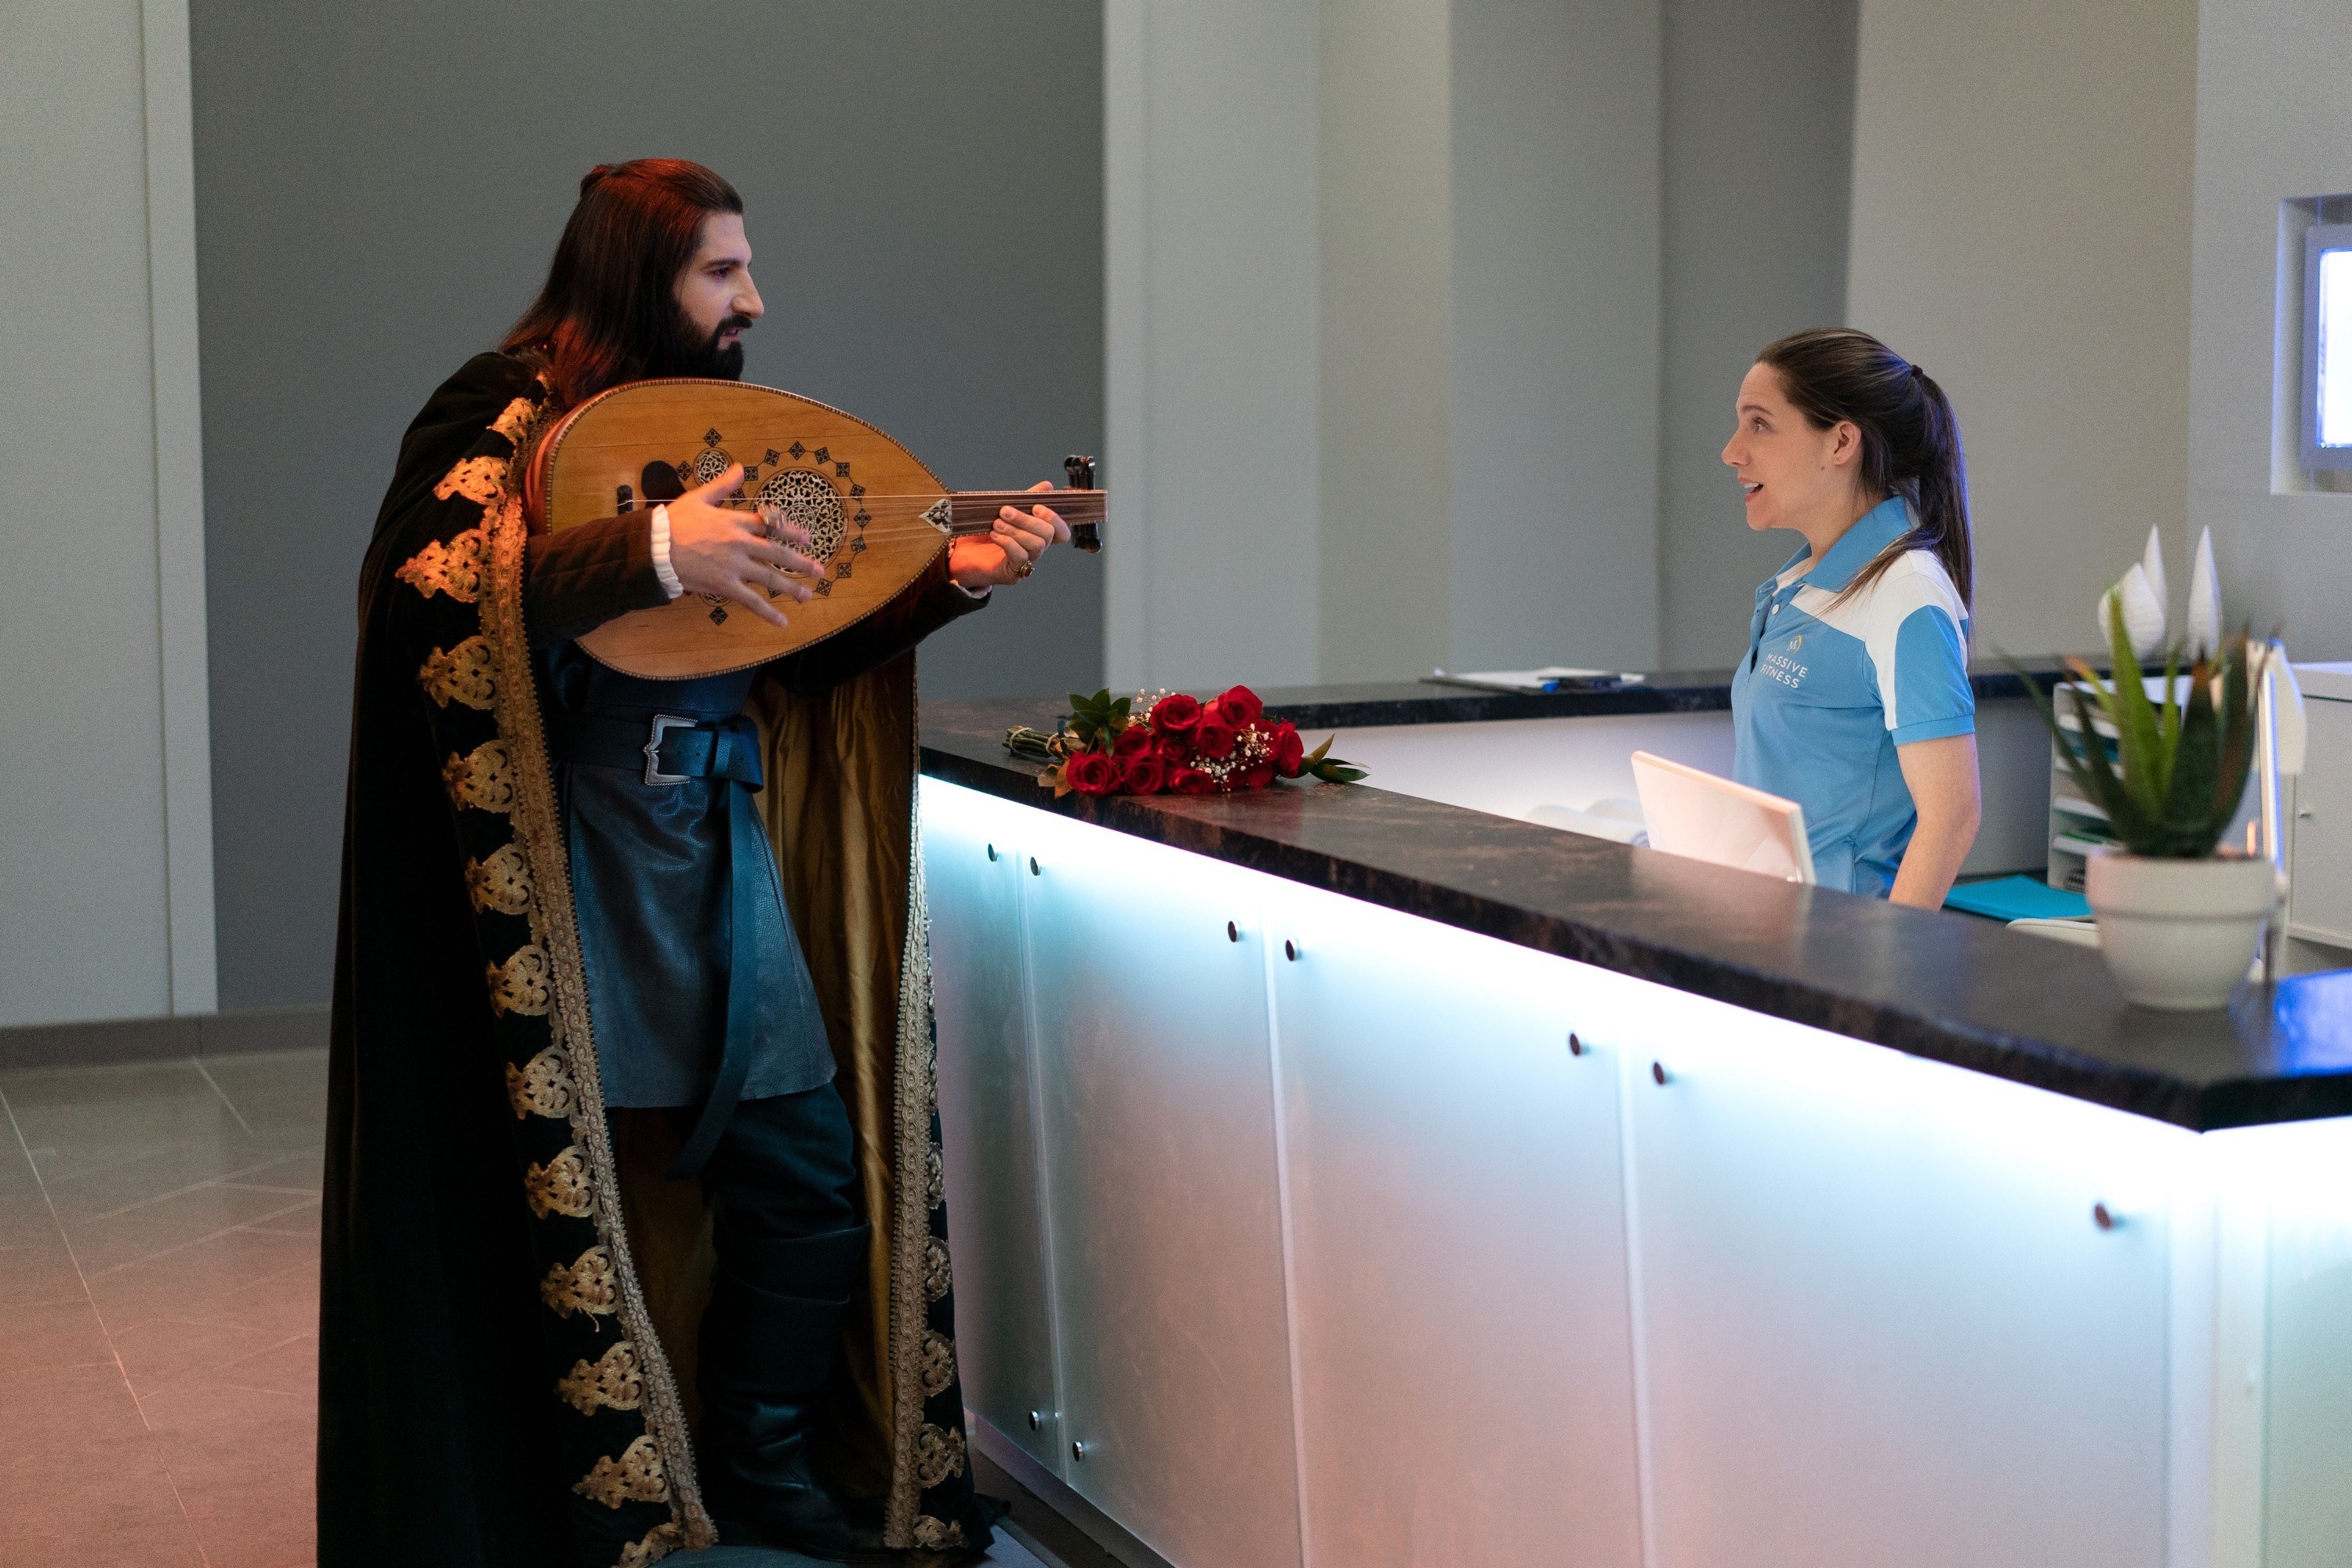 Nandor plays a lute guitar to the front desk receptionist at the gym